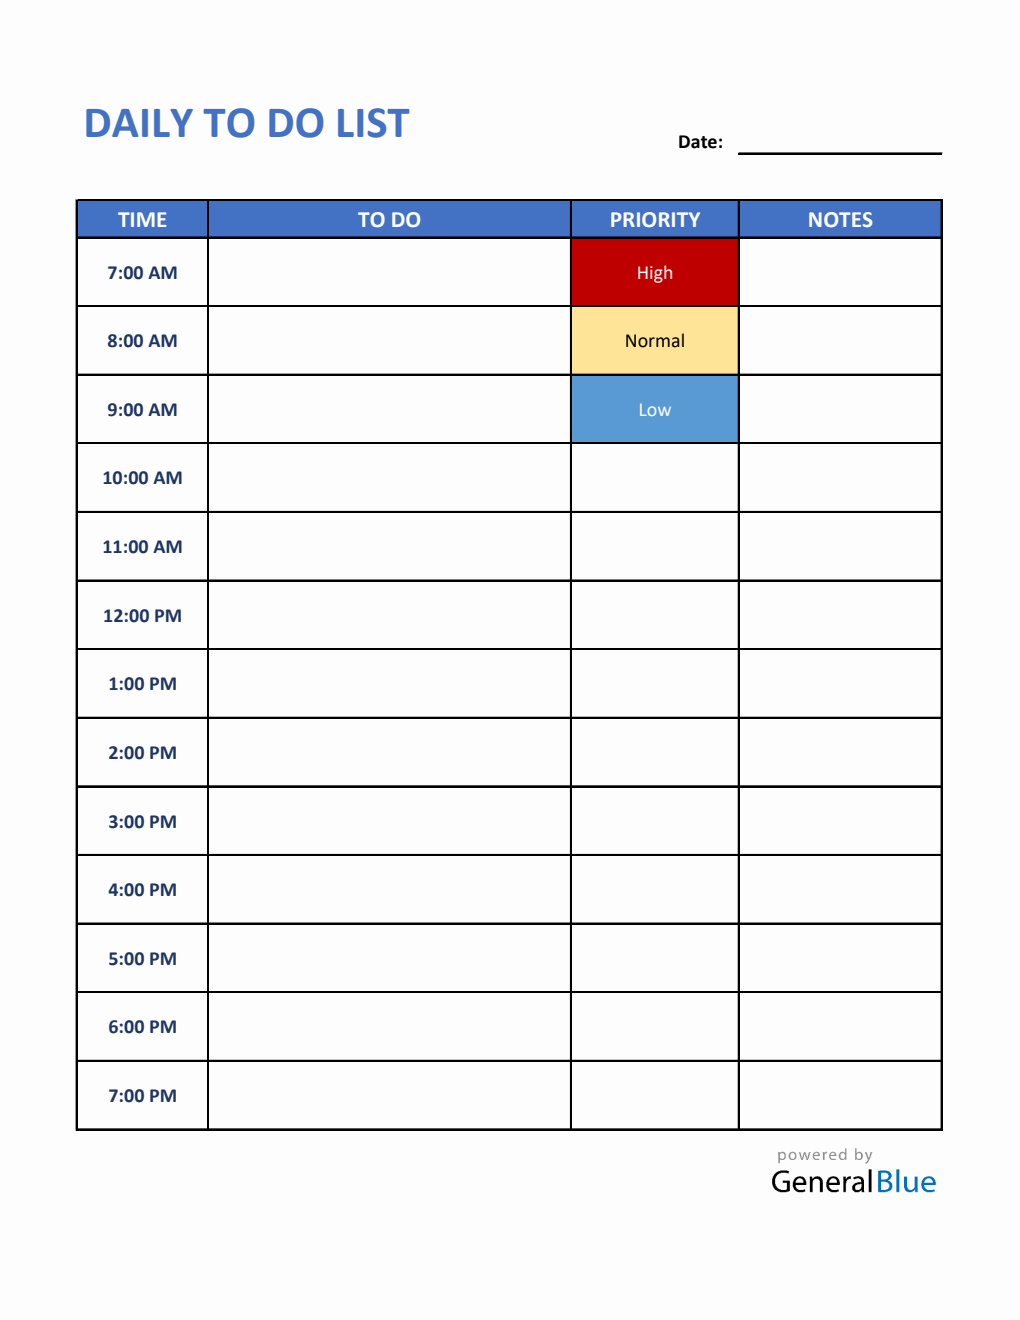 Daily To-Do List Template in Excel